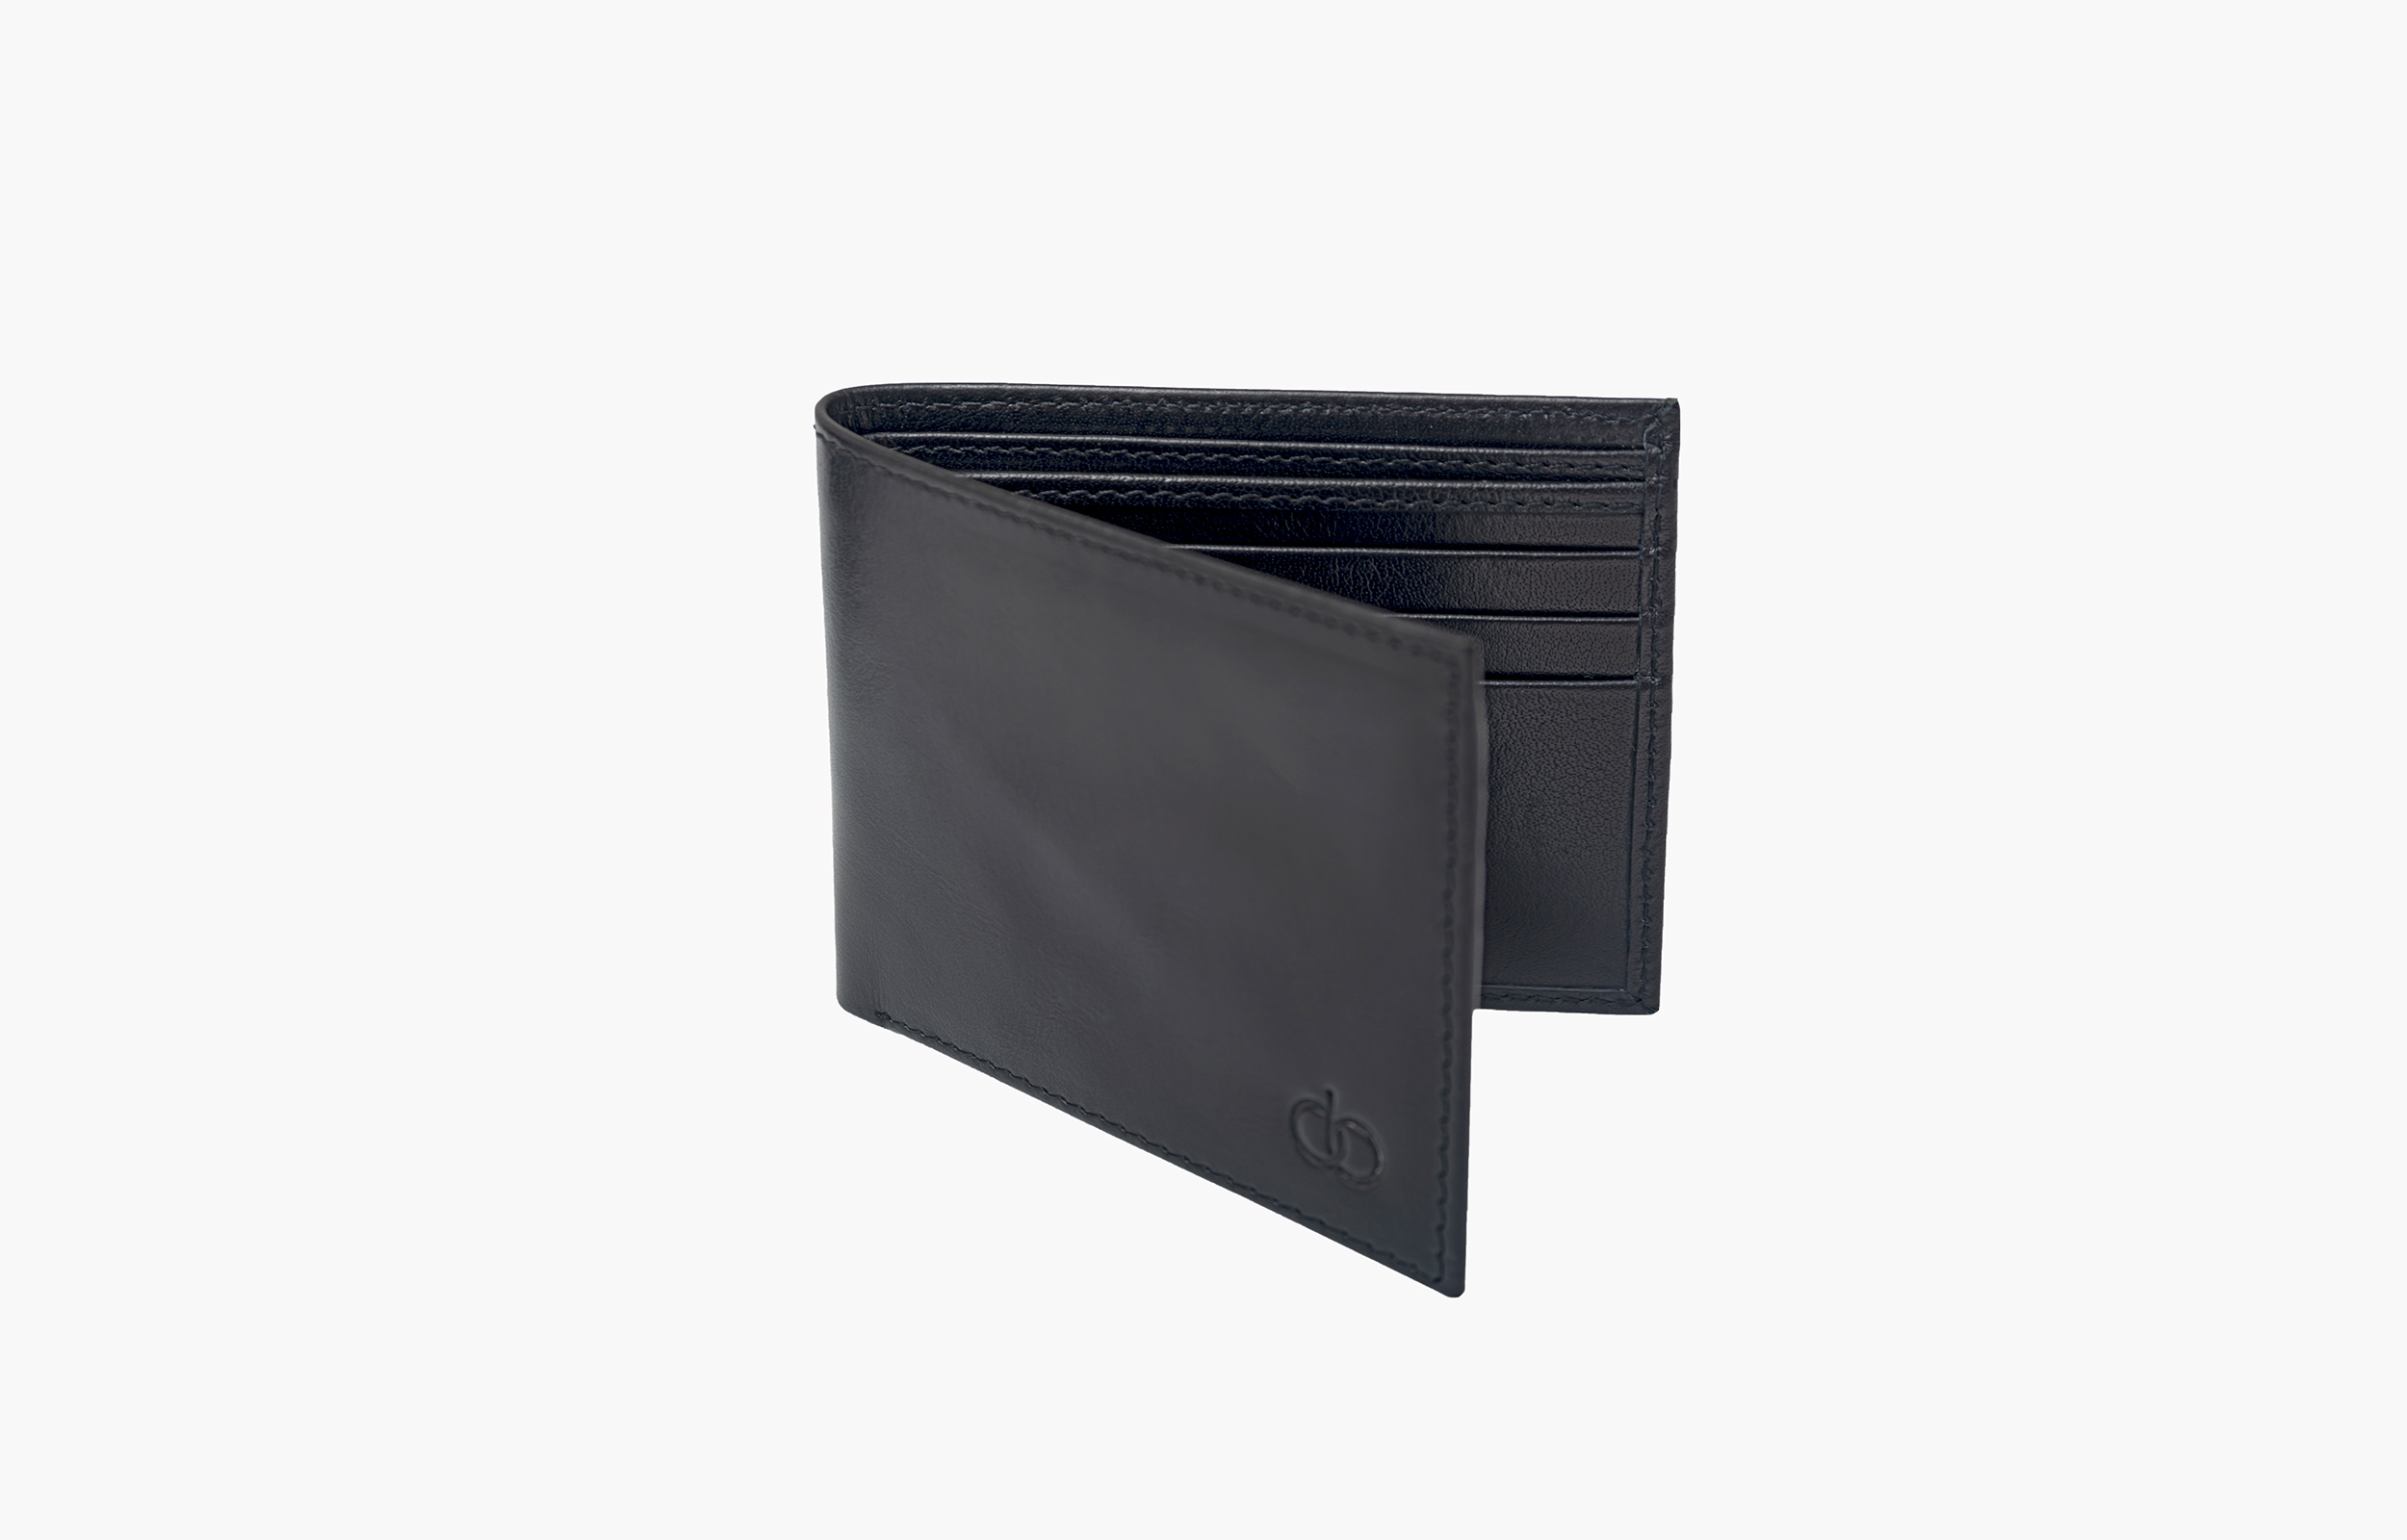 Holly Midnight Black Leather wallet UK 6